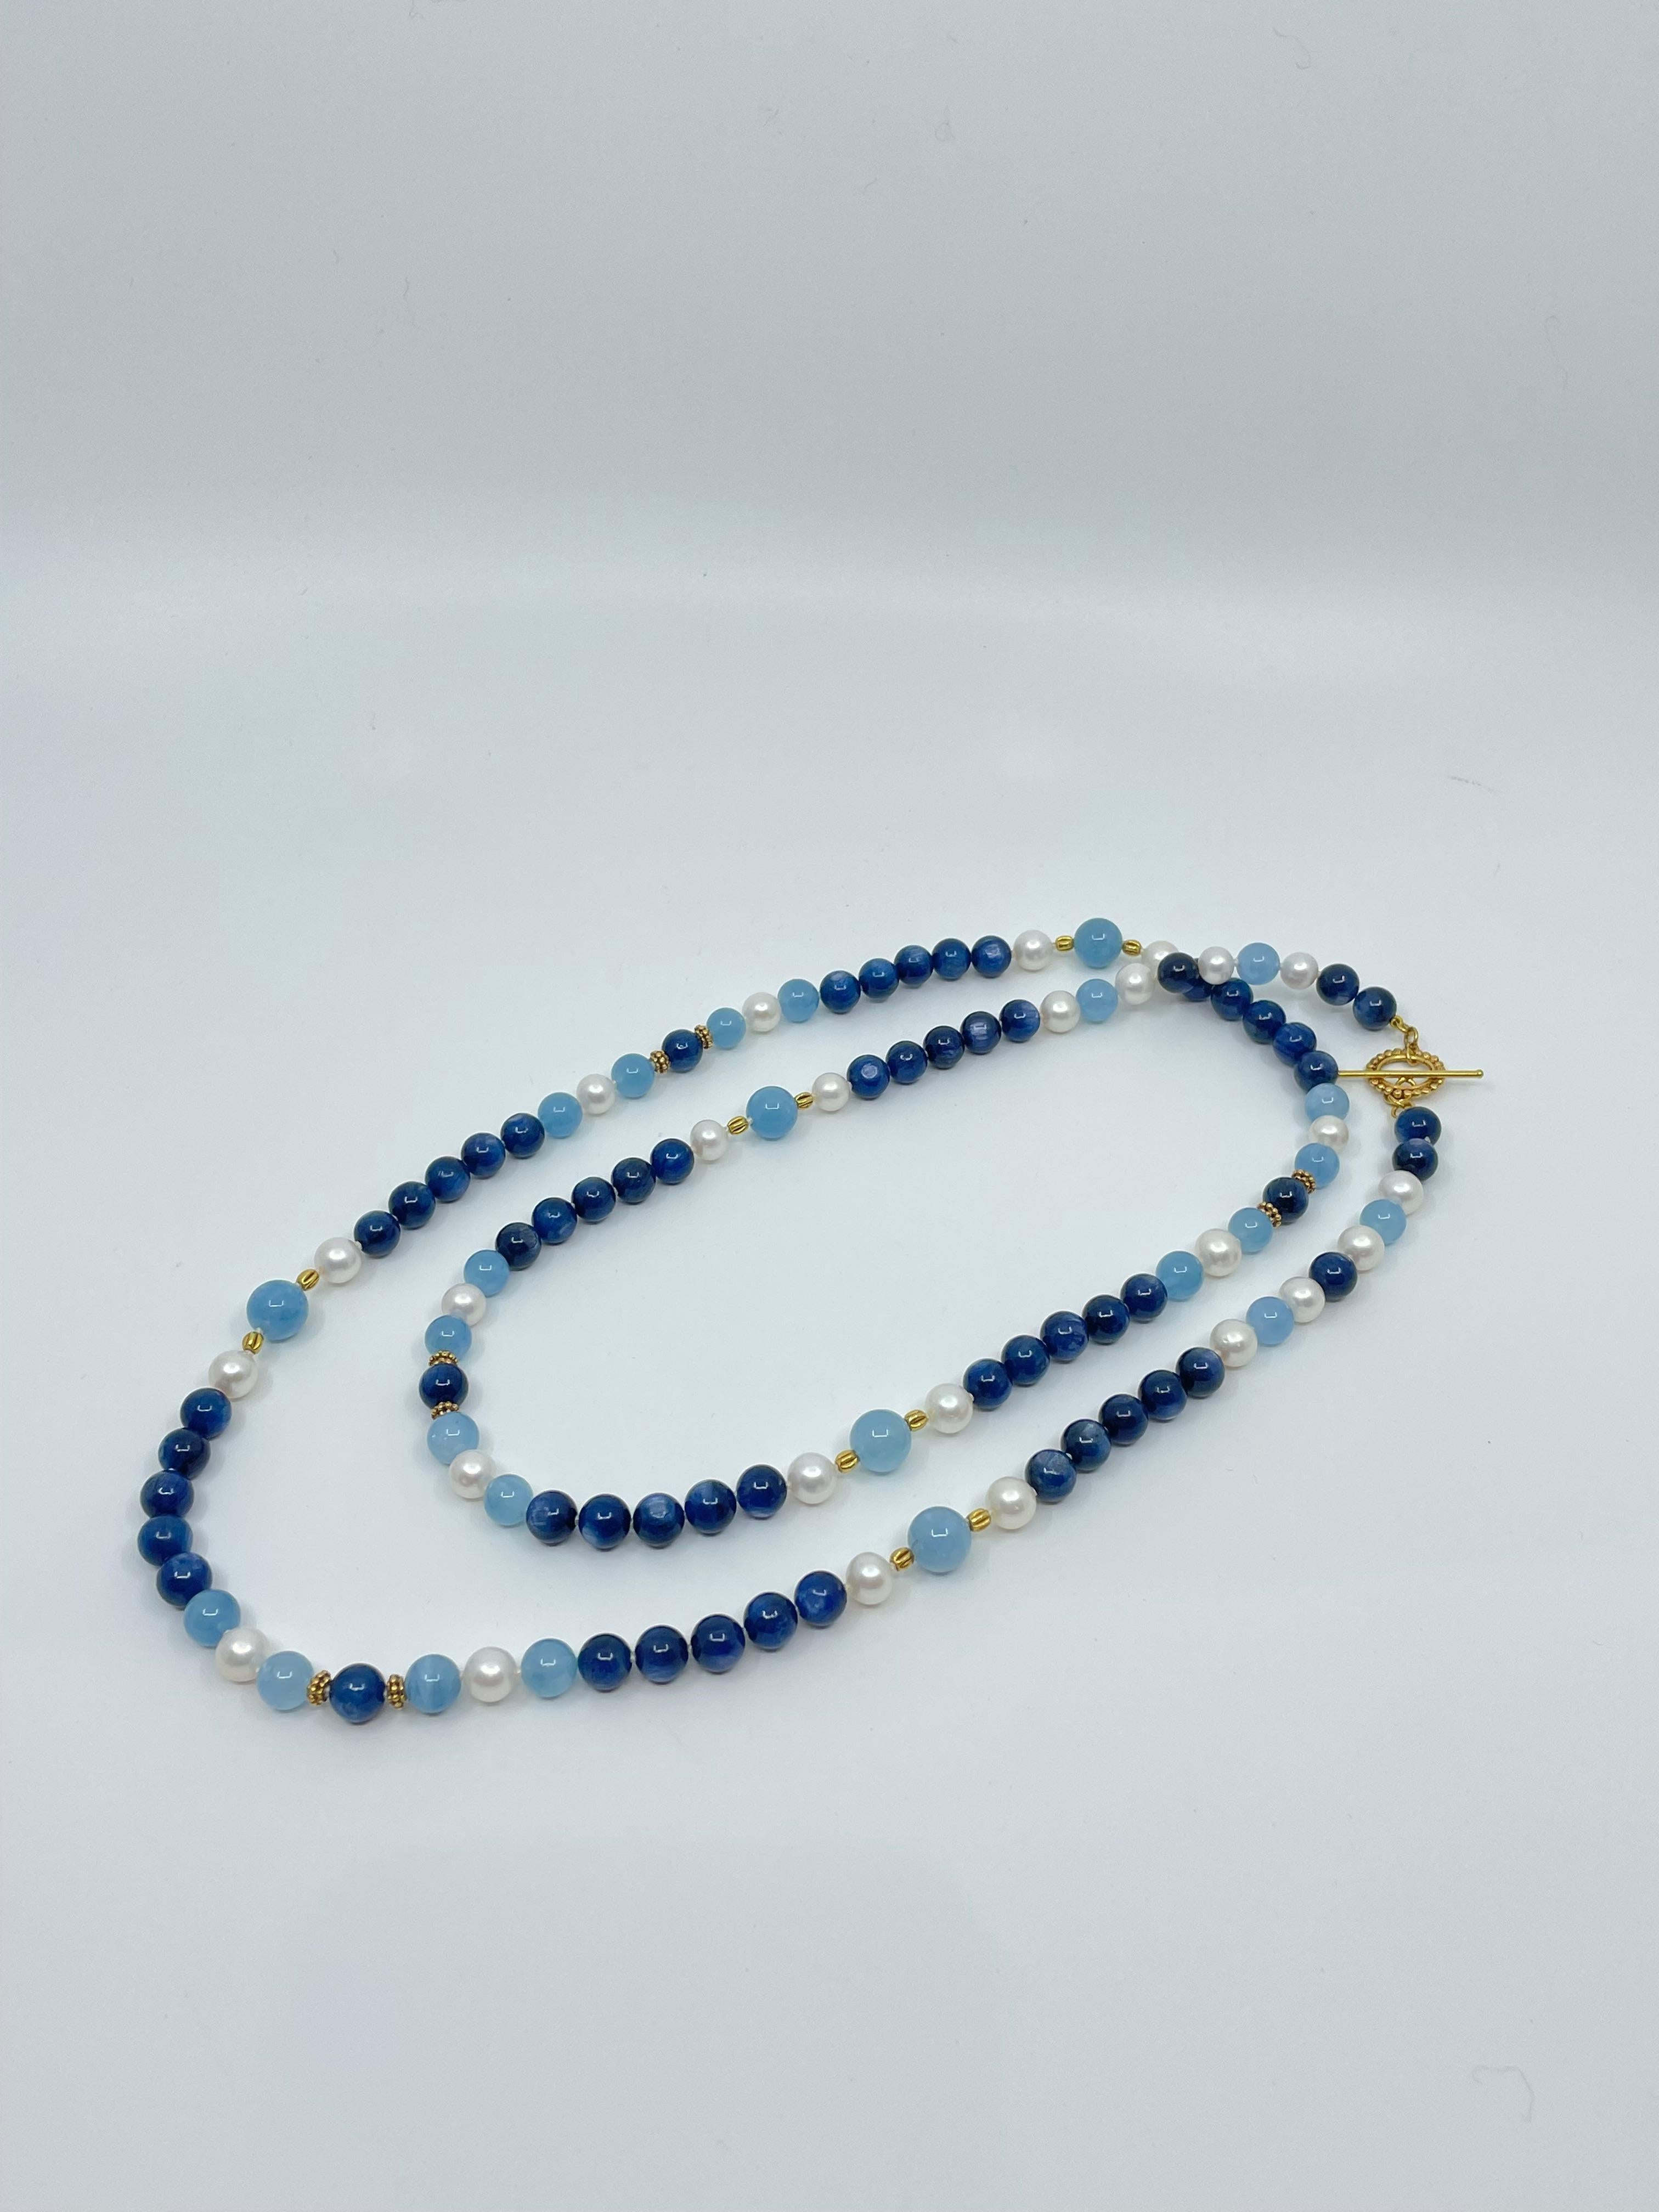 Aquamarine, Kyanite, Freshwater Pearl & 18K Gold Necklace For Sale 7